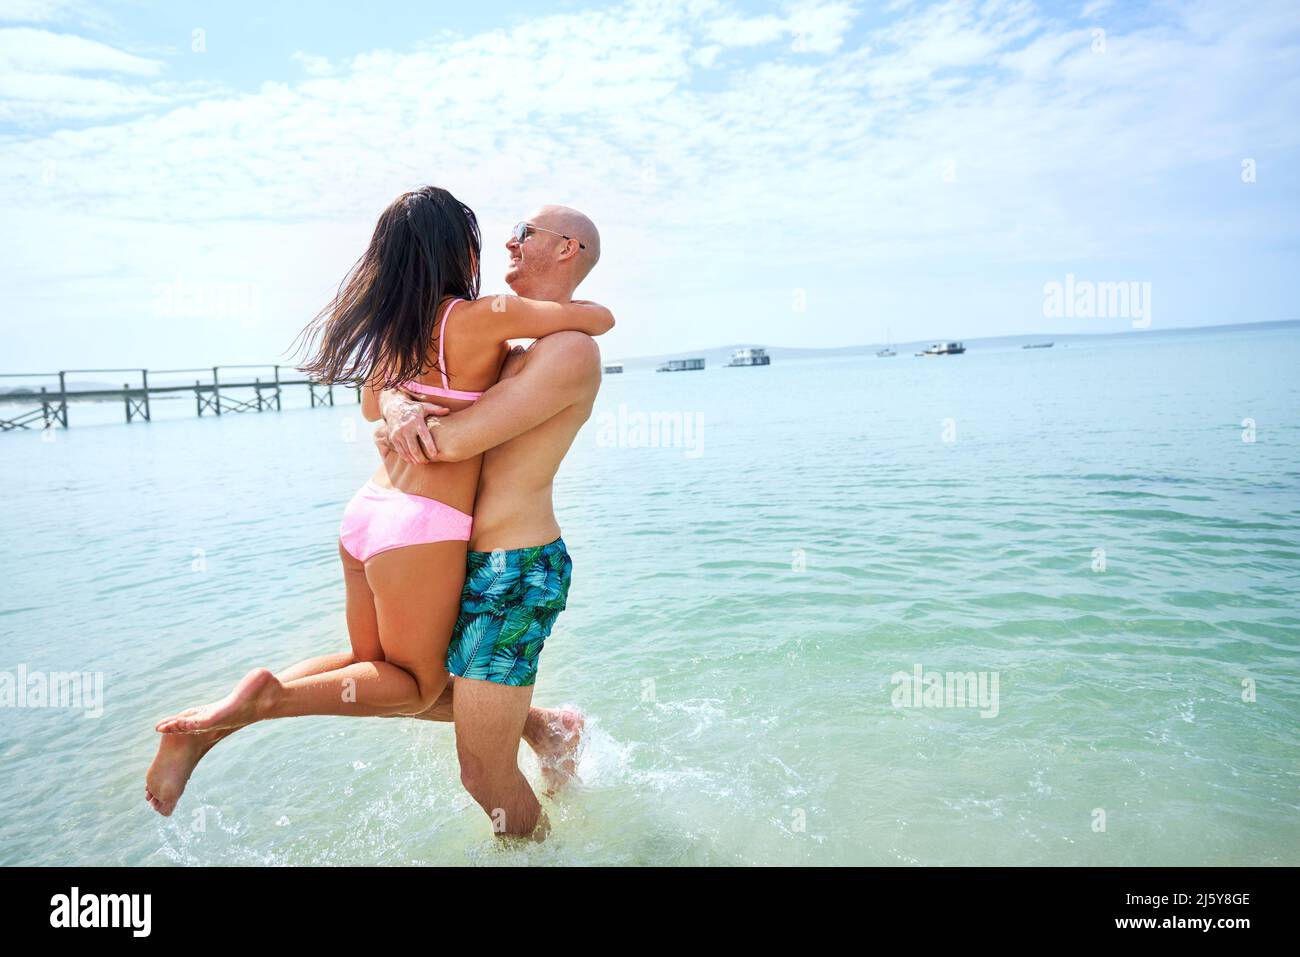 Happy, carefree couple playing in sunny summer ocean Stock Photo